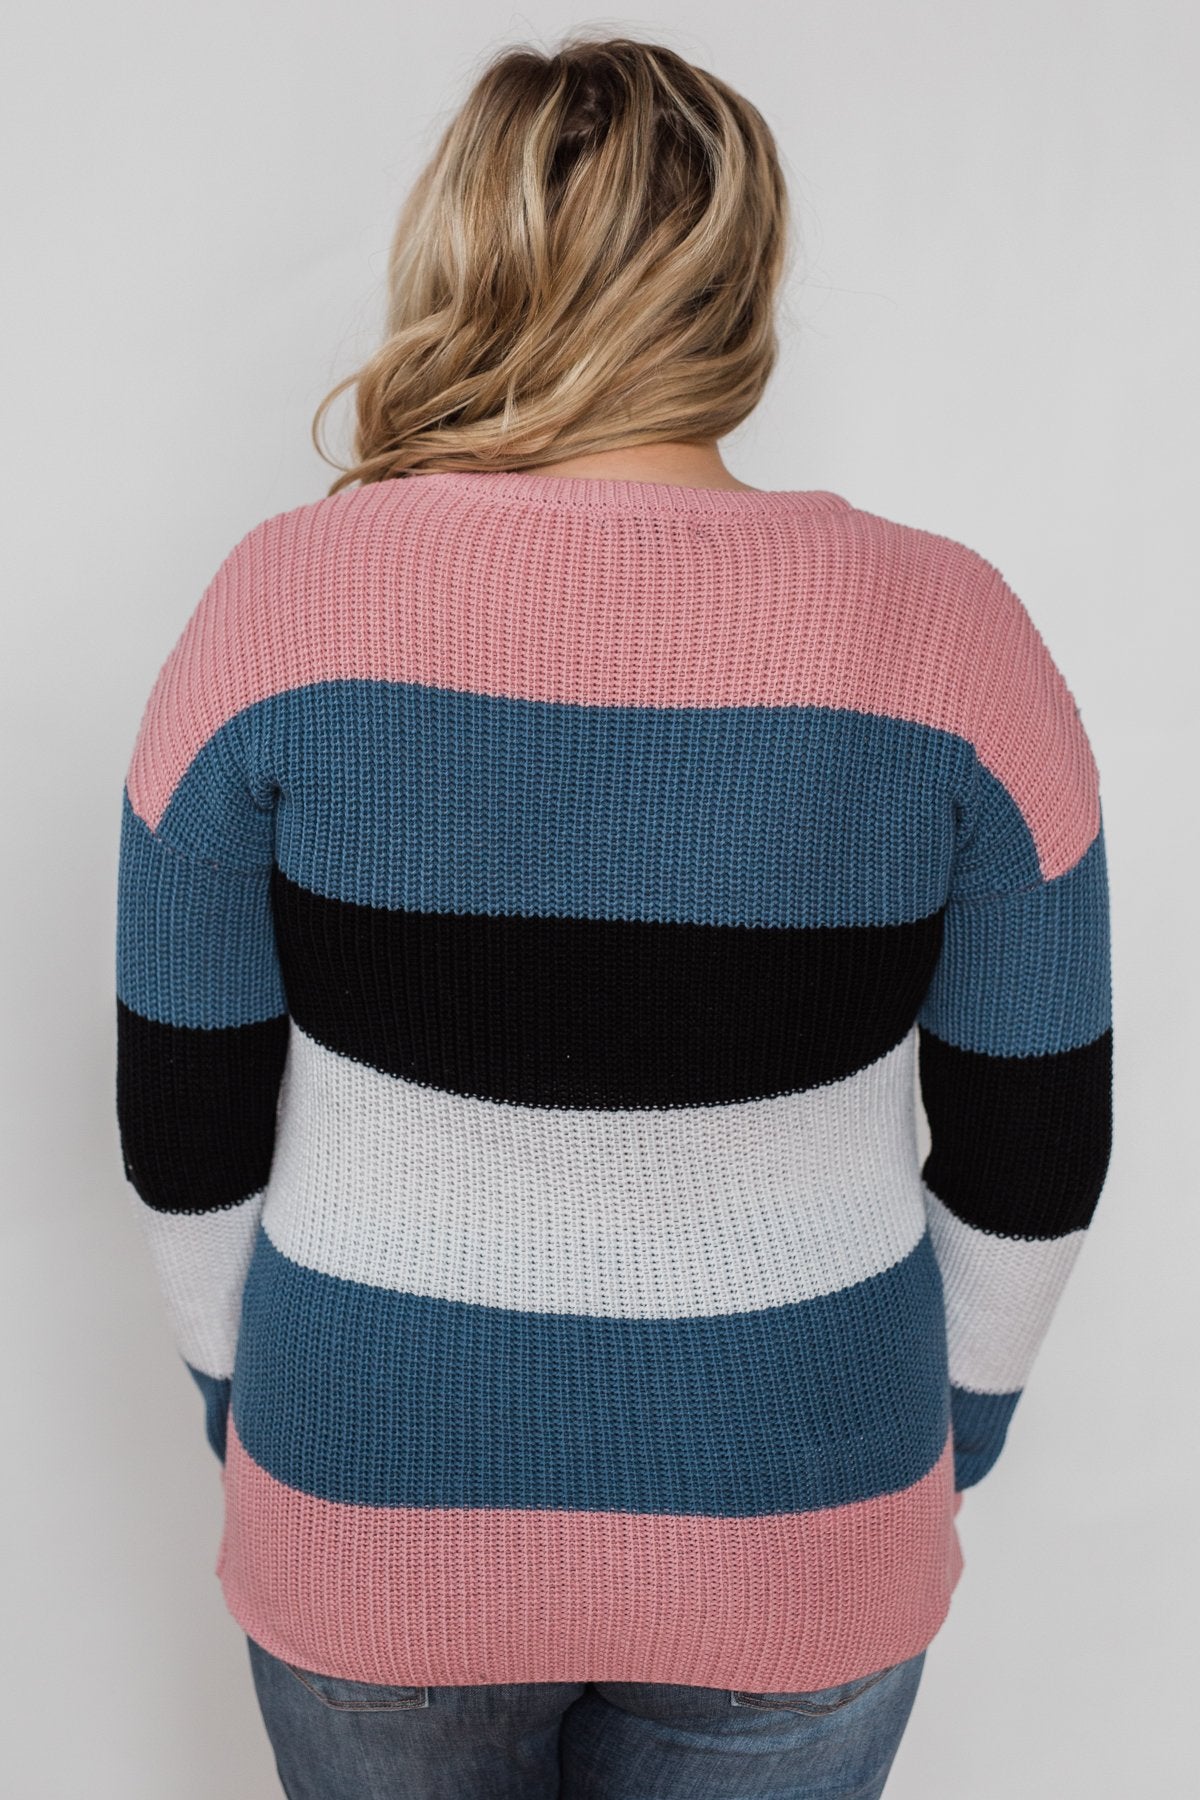 The Way to You Knitted Sweater - Rose, Teal, & Black